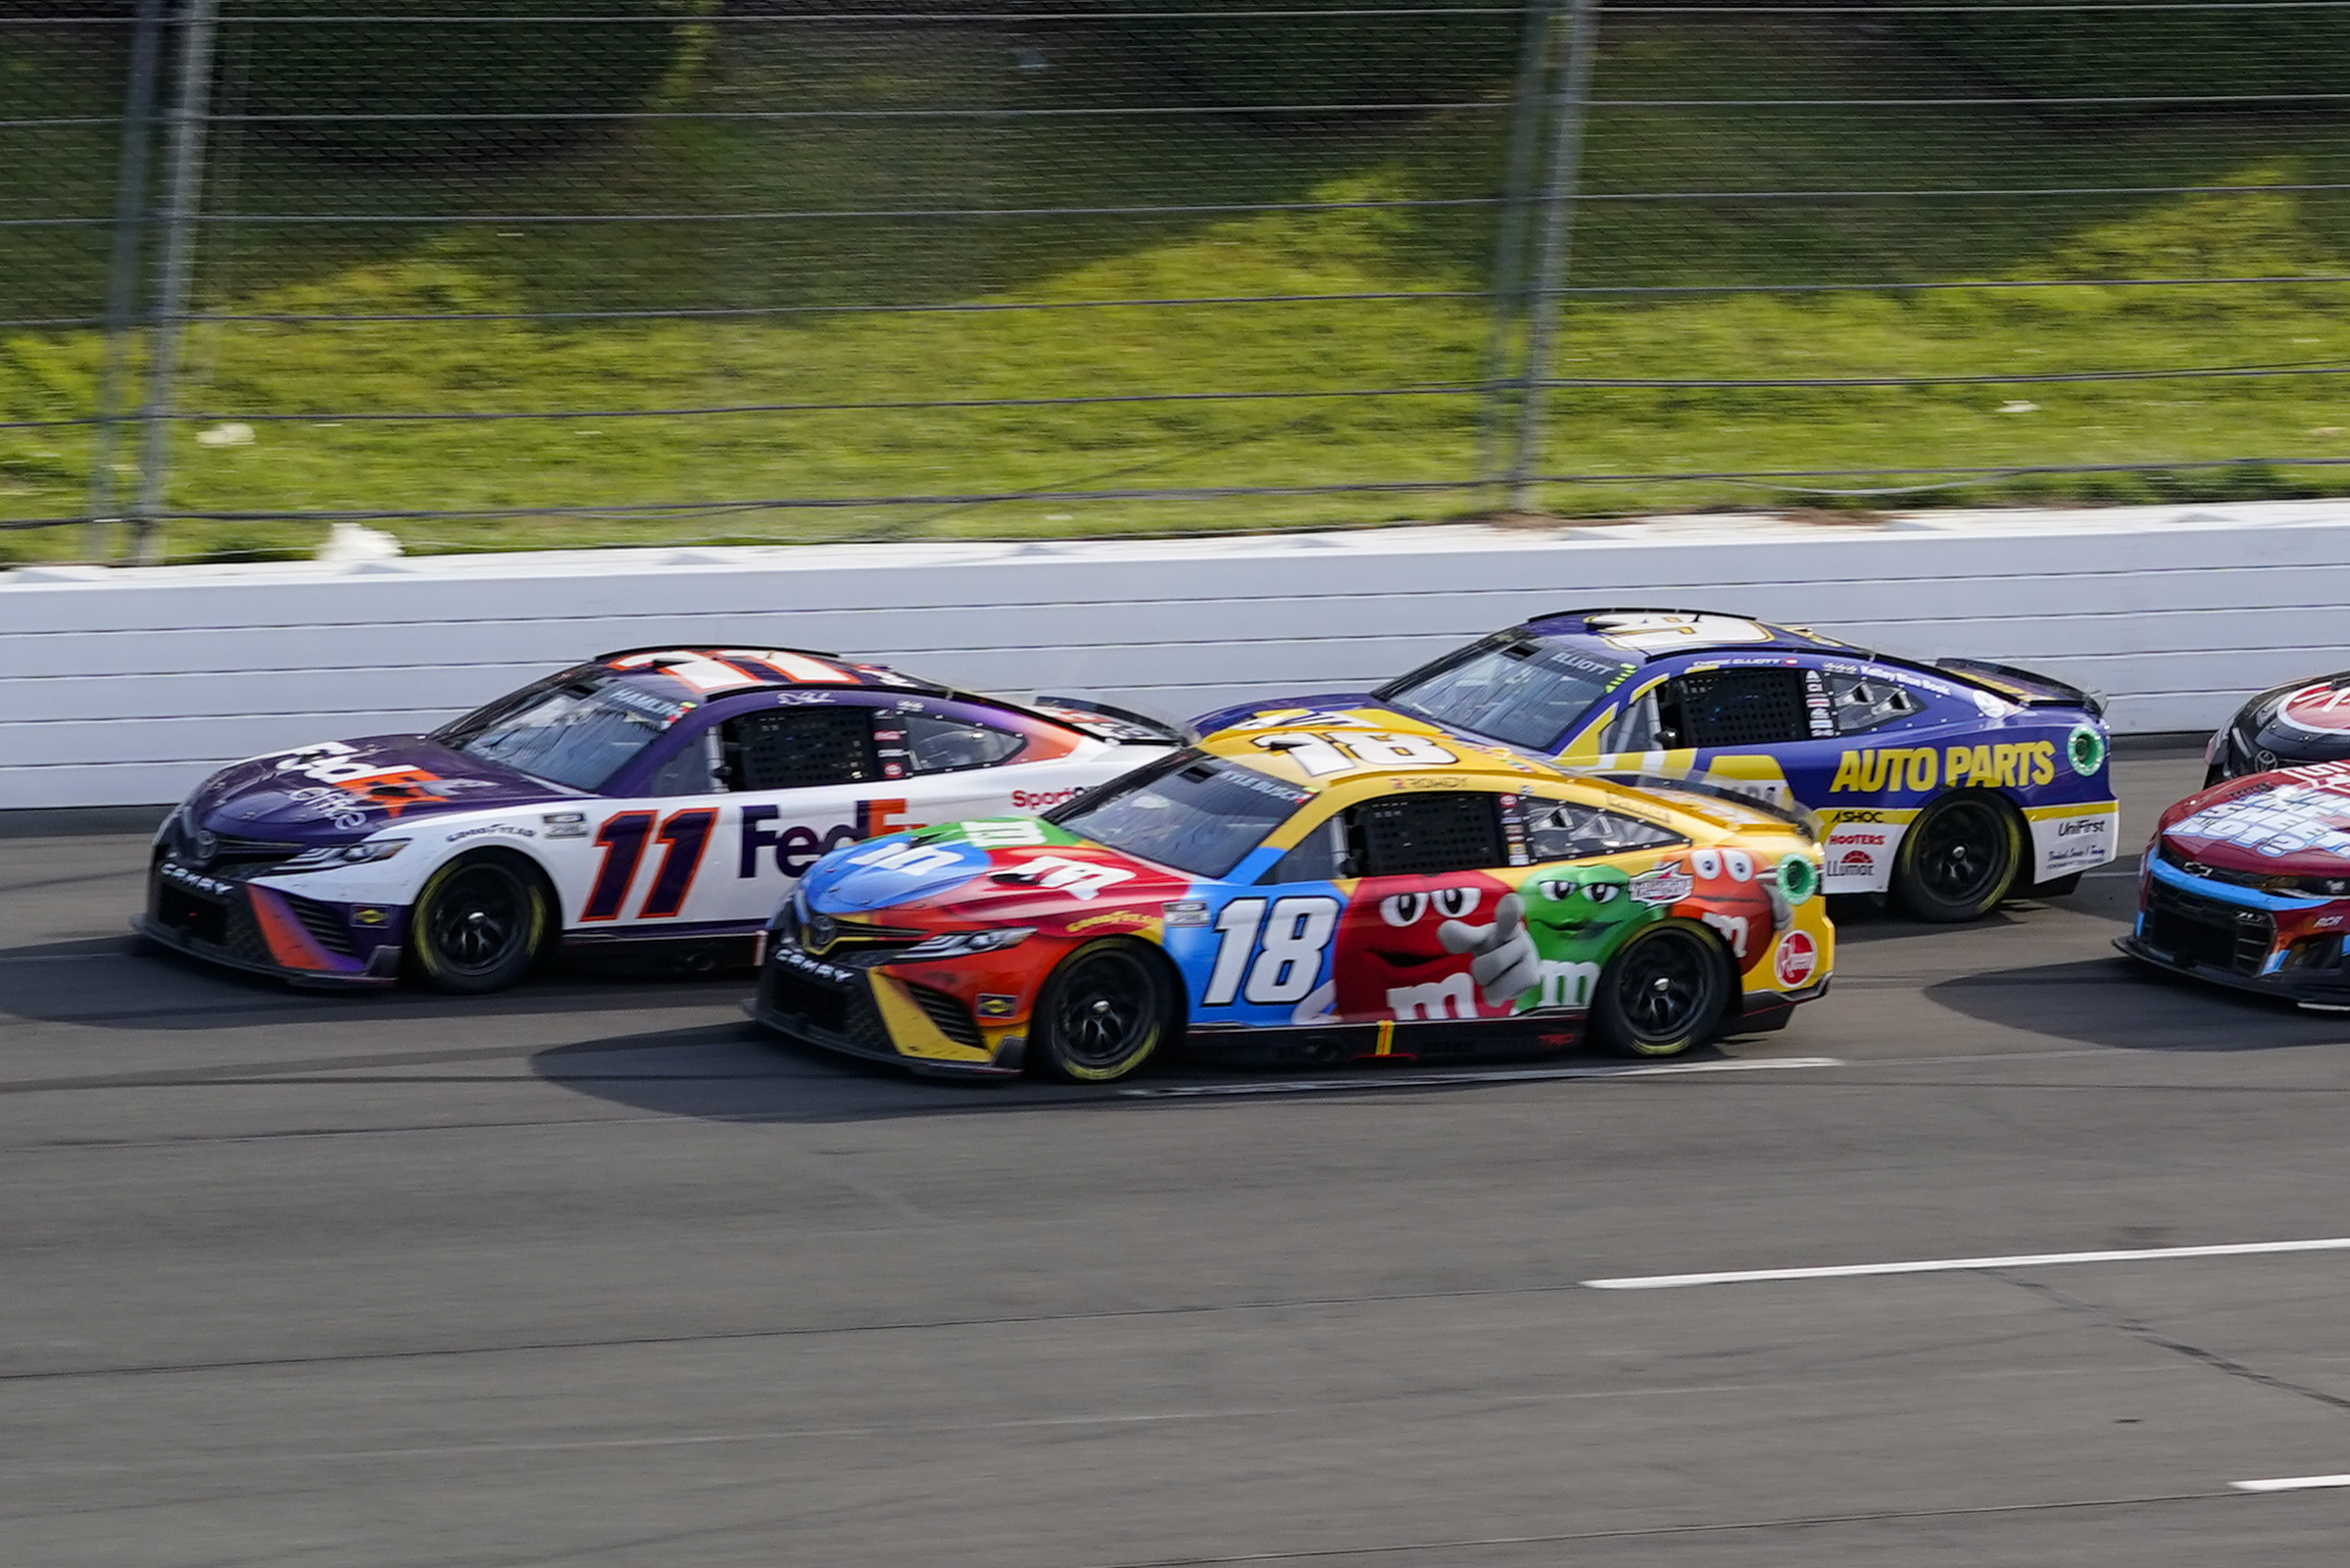 The Debate Over 2 Auto Racing Series Is in the Details - The New